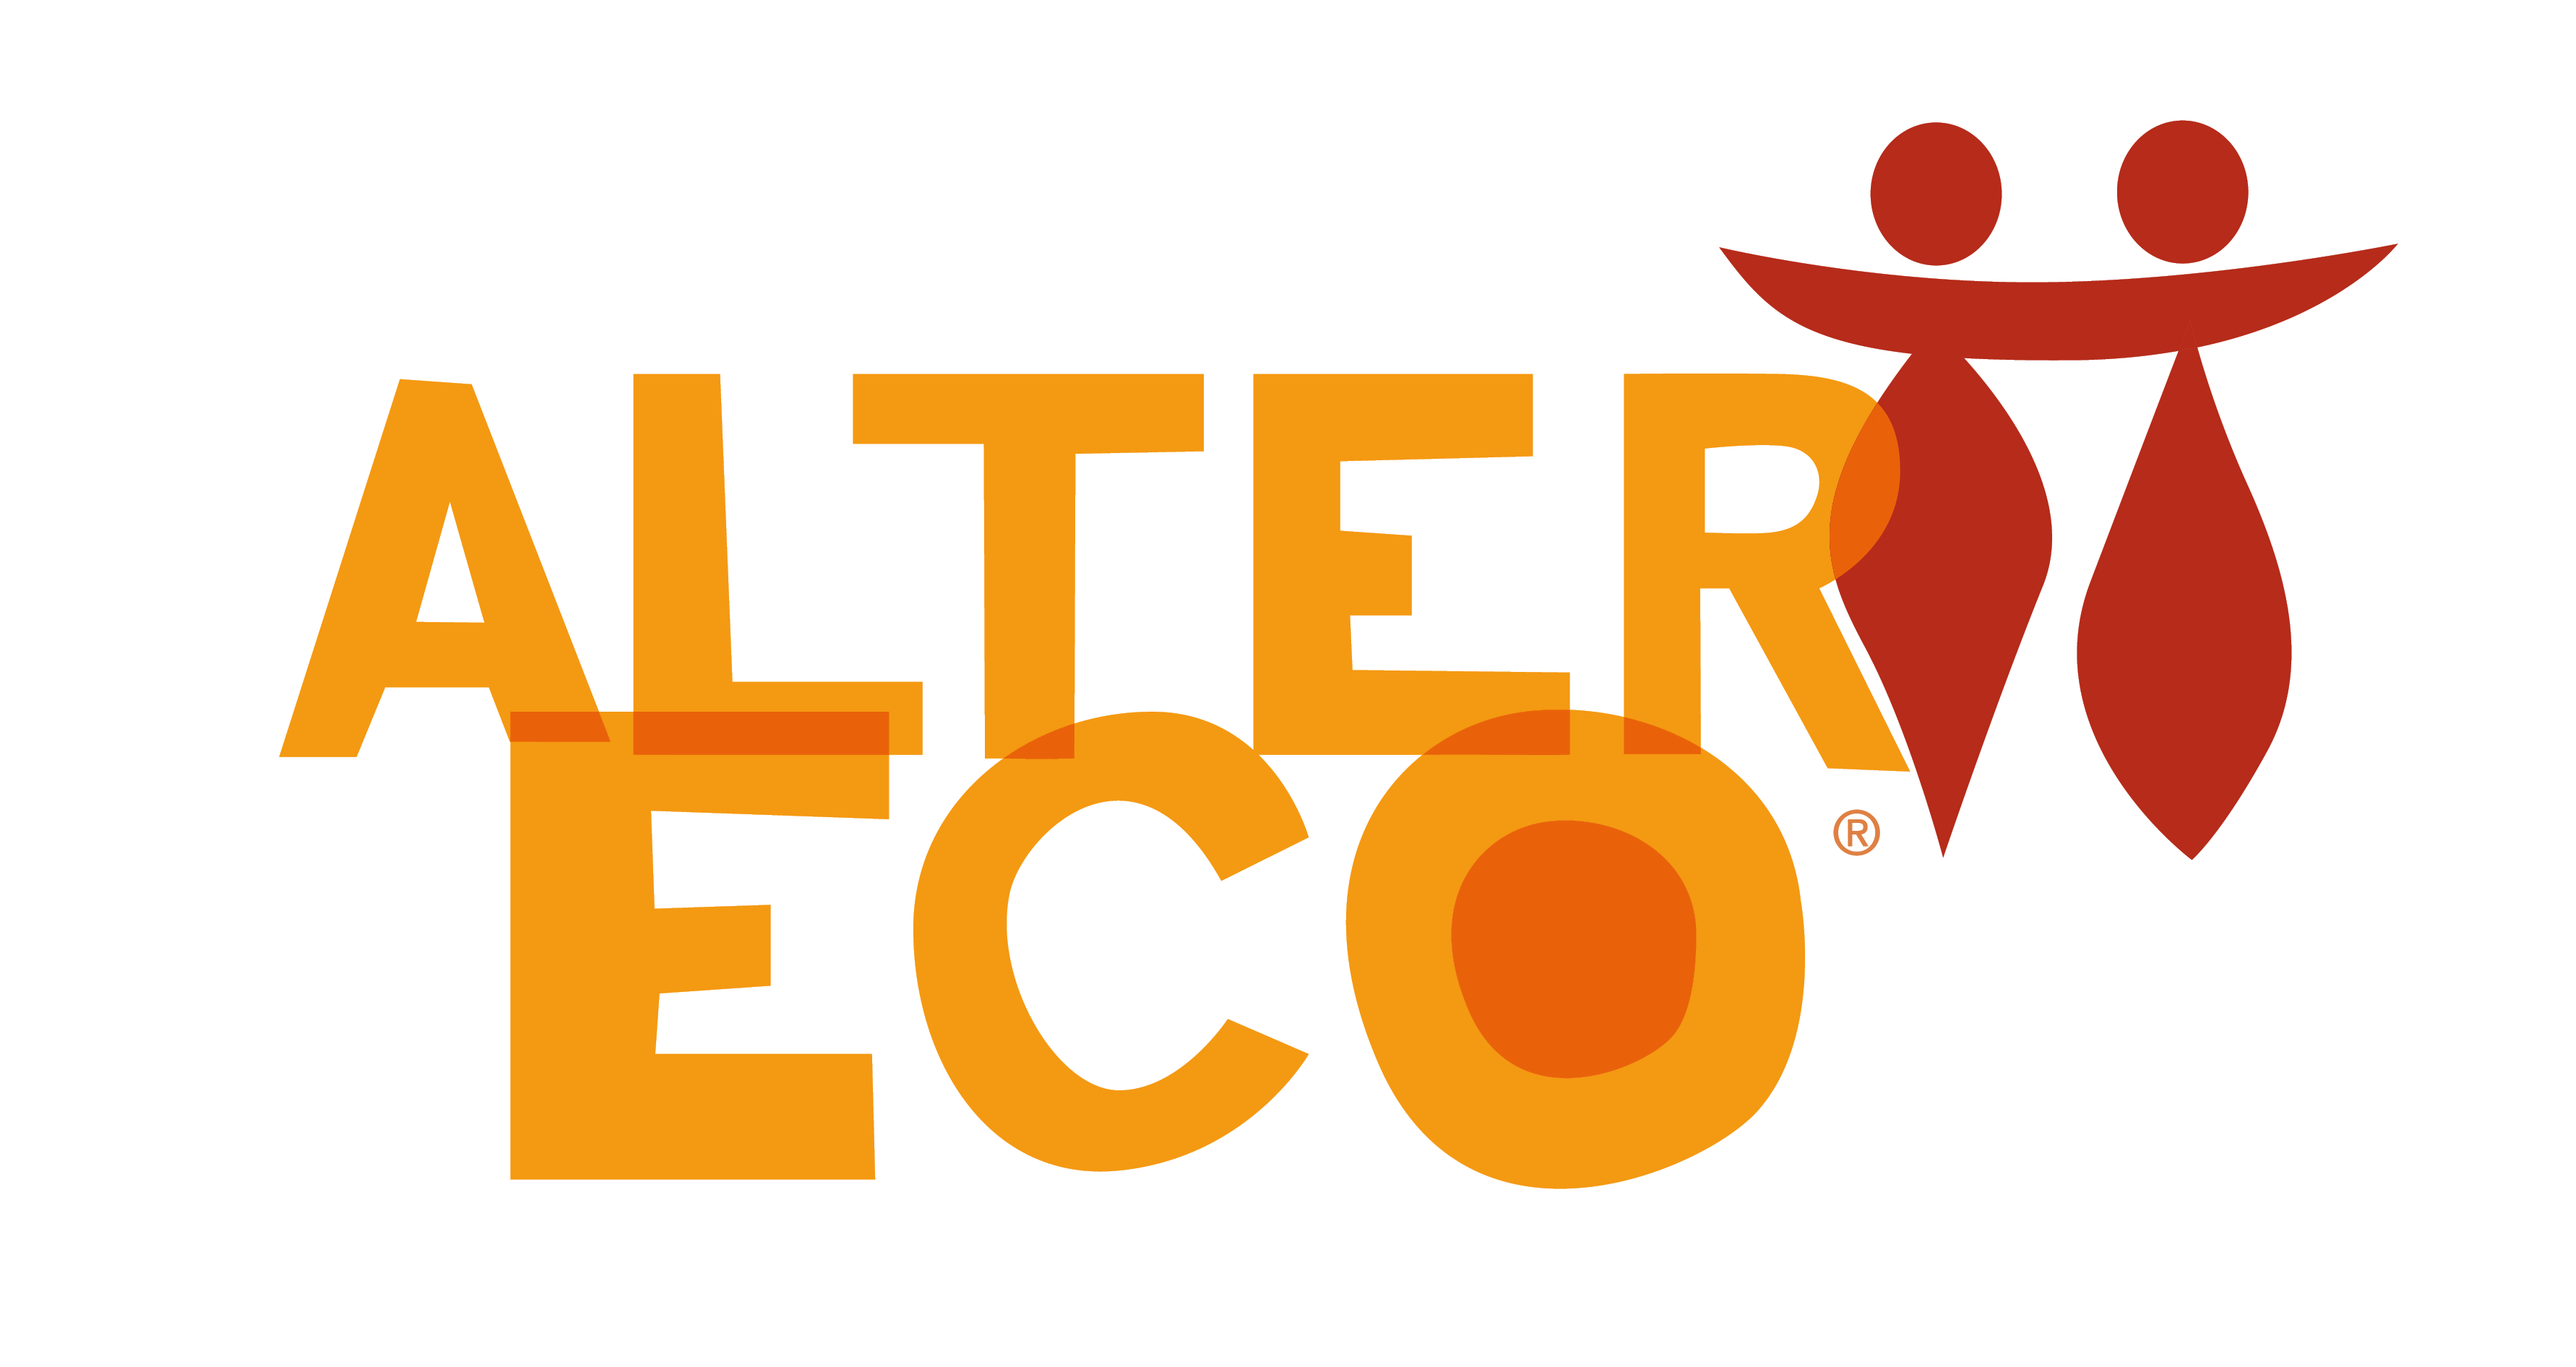 How ethical is Alter Eco?